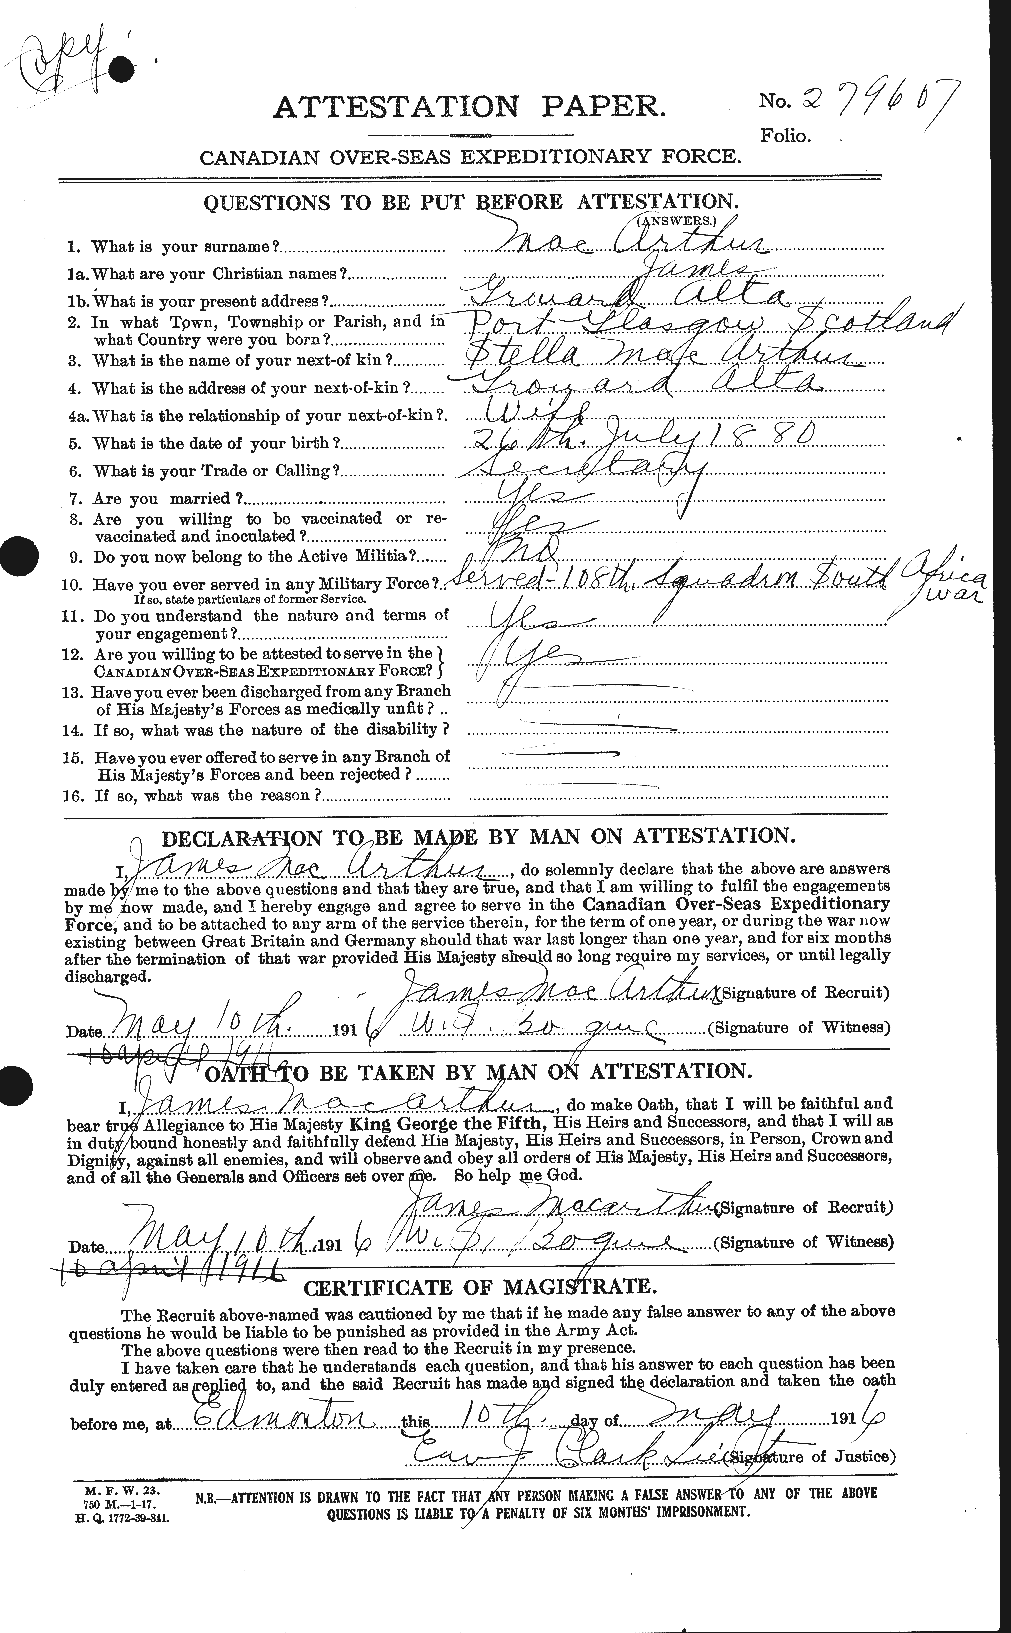 Personnel Records of the First World War - CEF 131000a